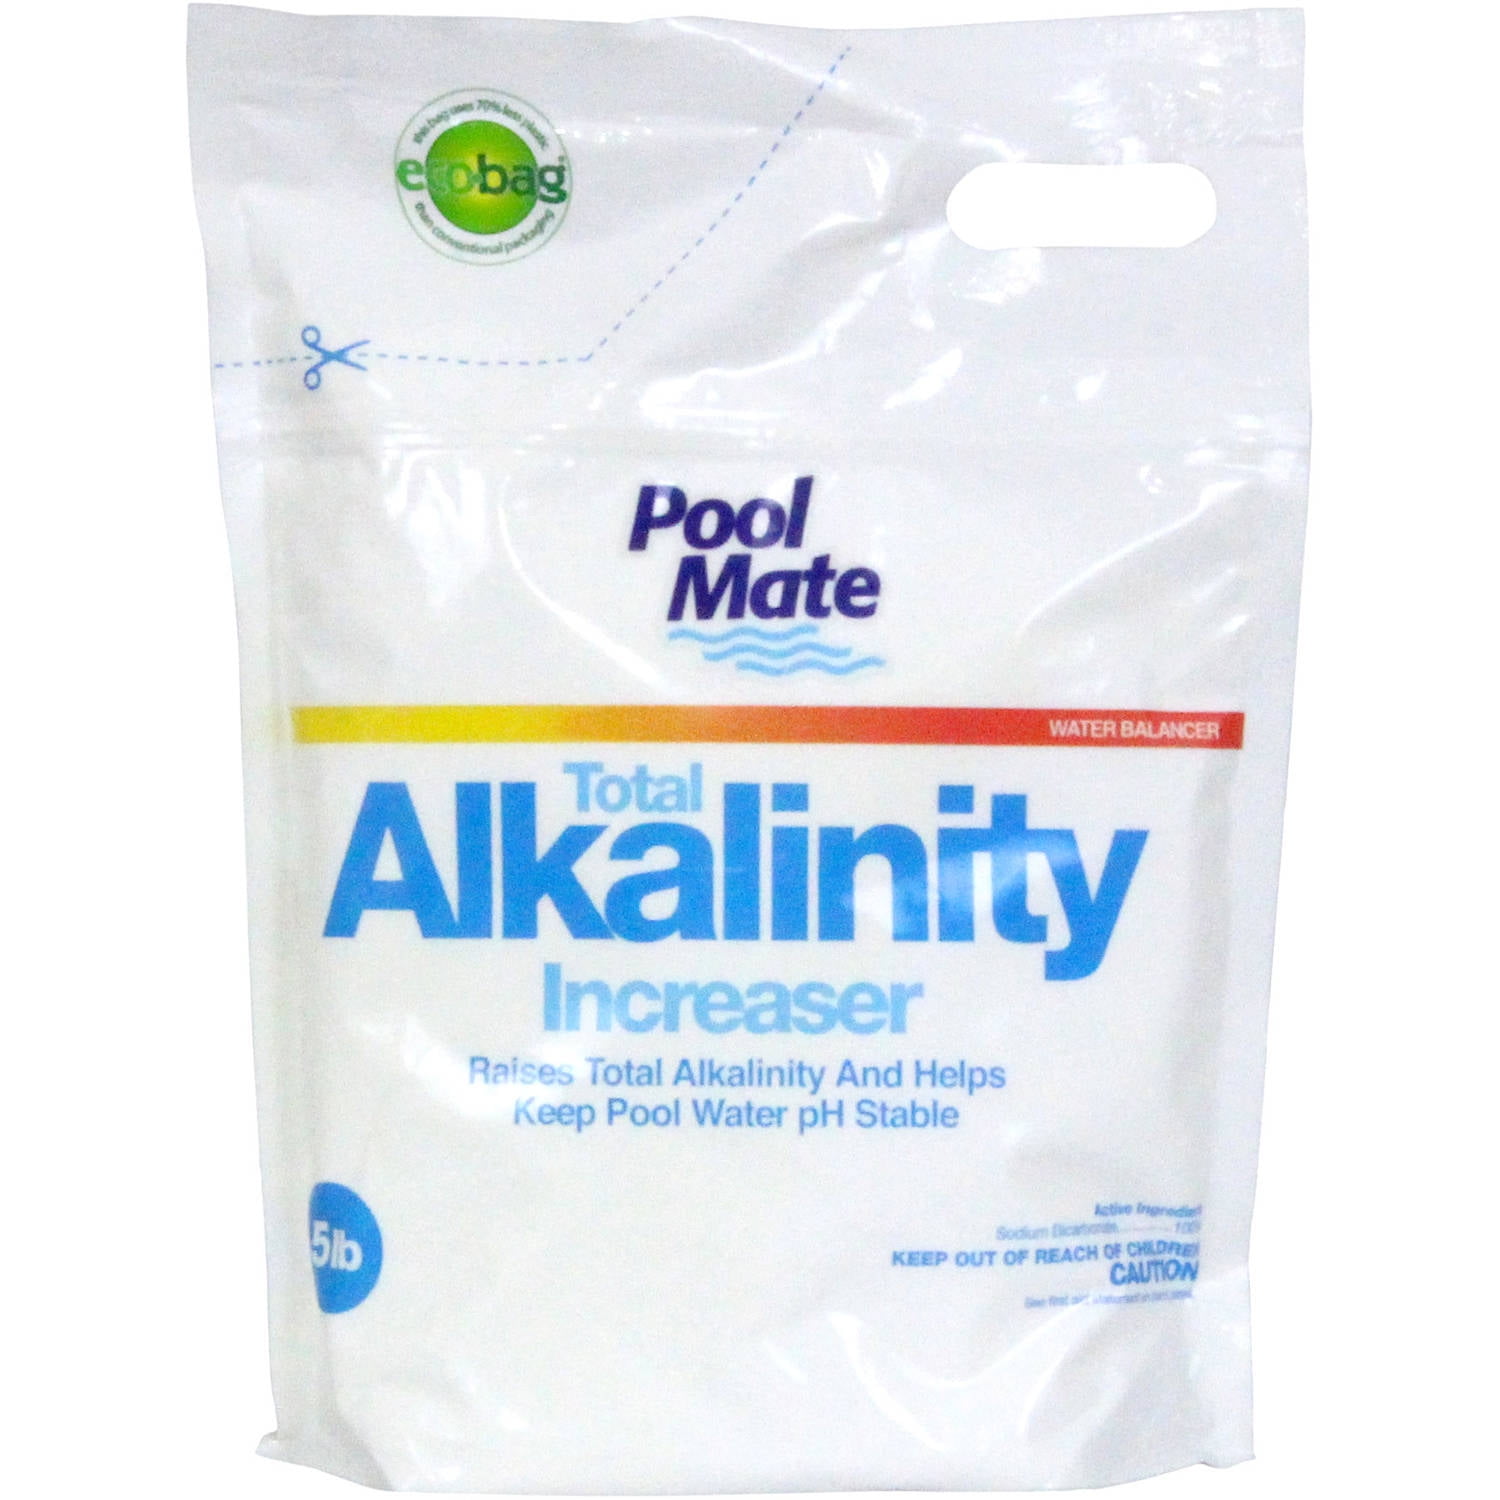 Pool Mate Total Alkalinity Increaser for Swimming Pools